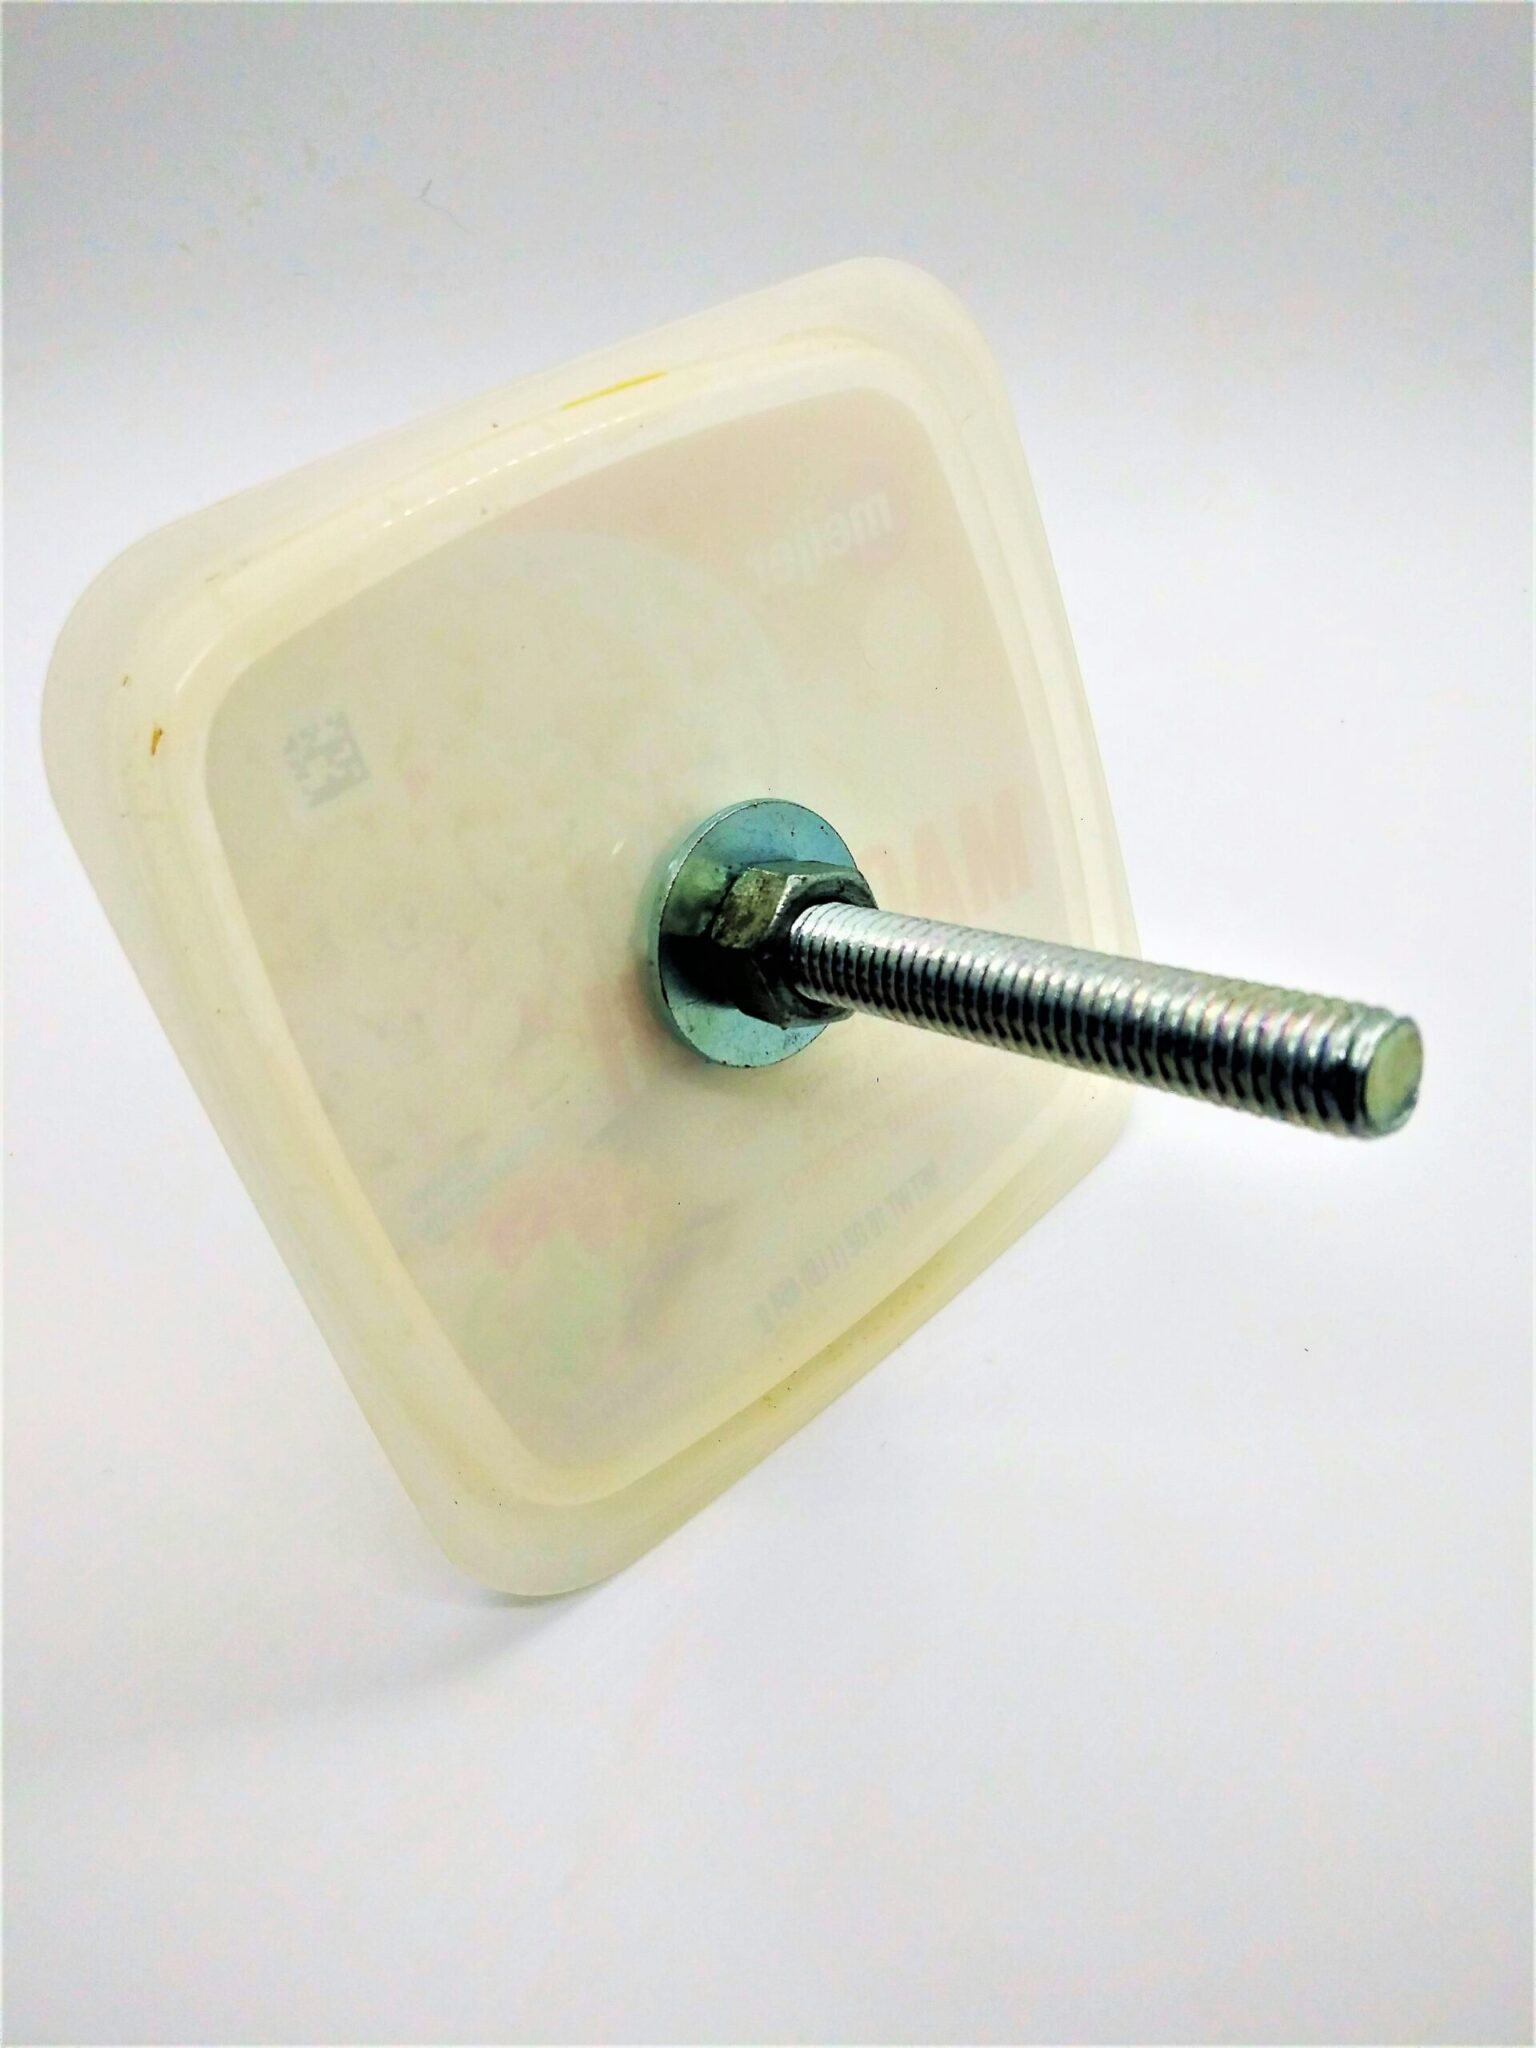 DIY anal sex toys, making a vegetable base. Photo of a plastic lid with a j-bolt through the middle tightened with a washer and nut on both sides of the lid.